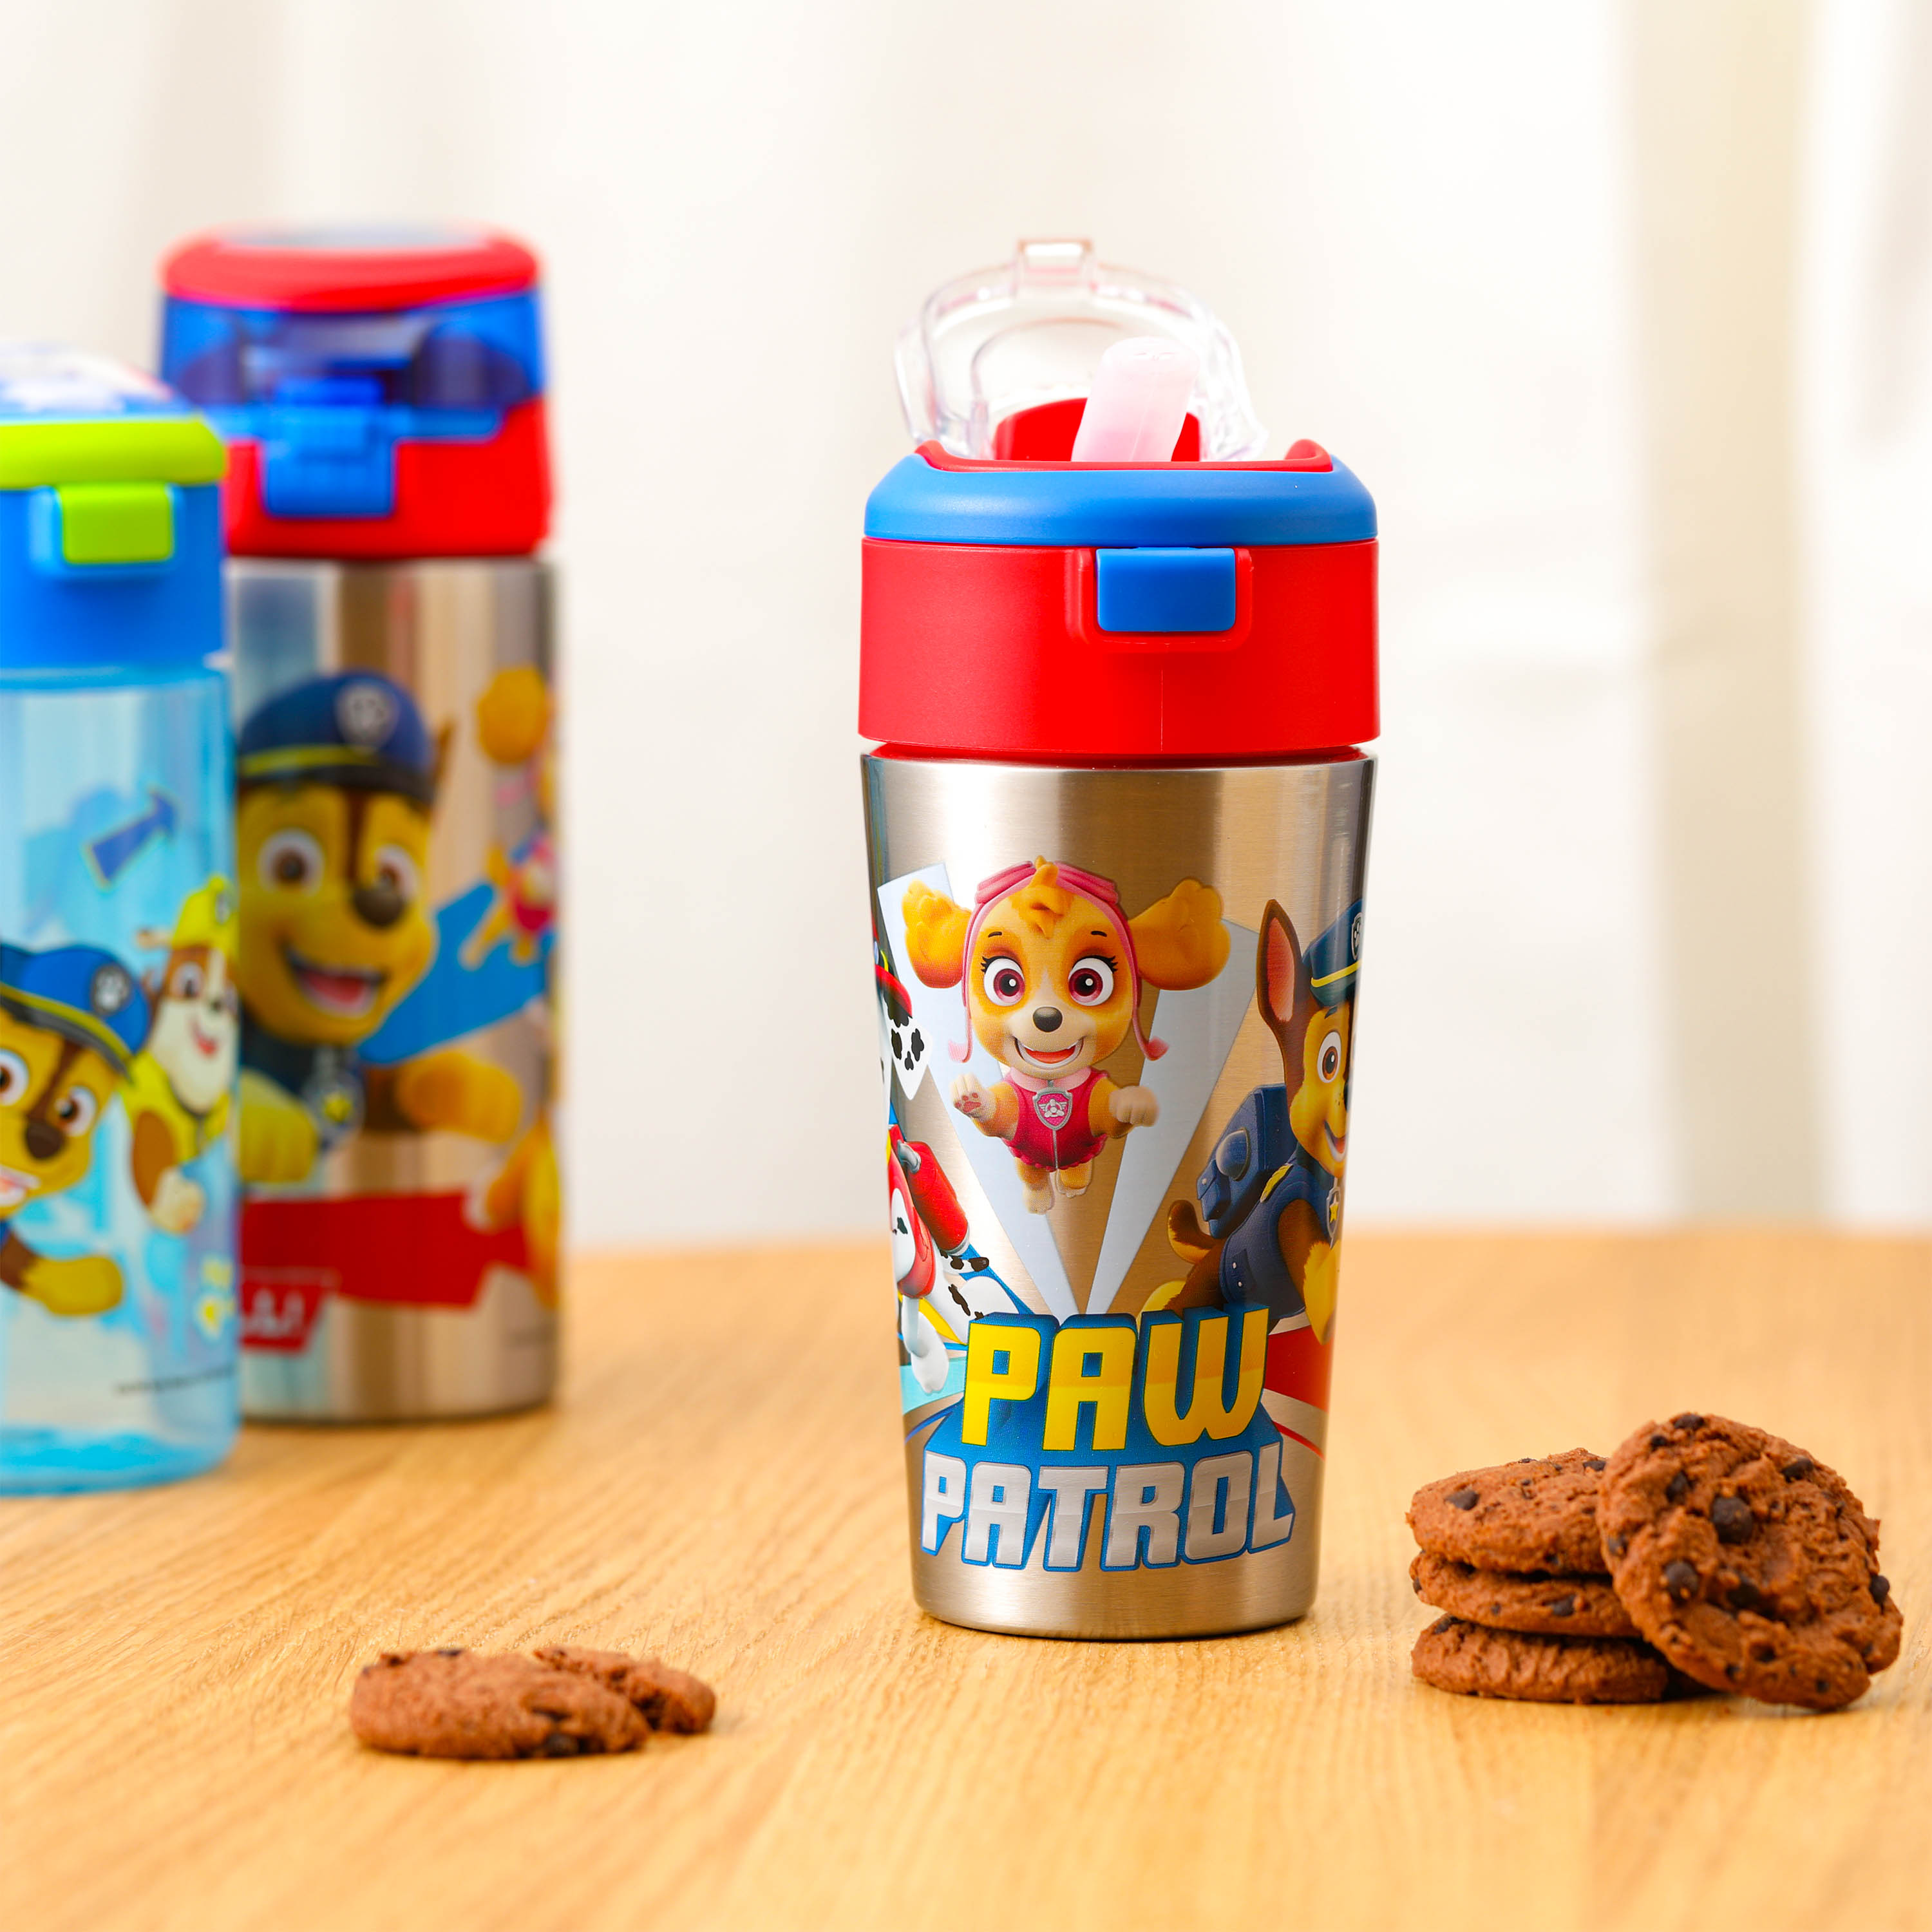 Paw Patrol 12 ounce Vacuum Insulated Reusable Stainless Steel Water Bottle, Skye, Rubble & Friends slideshow image 2